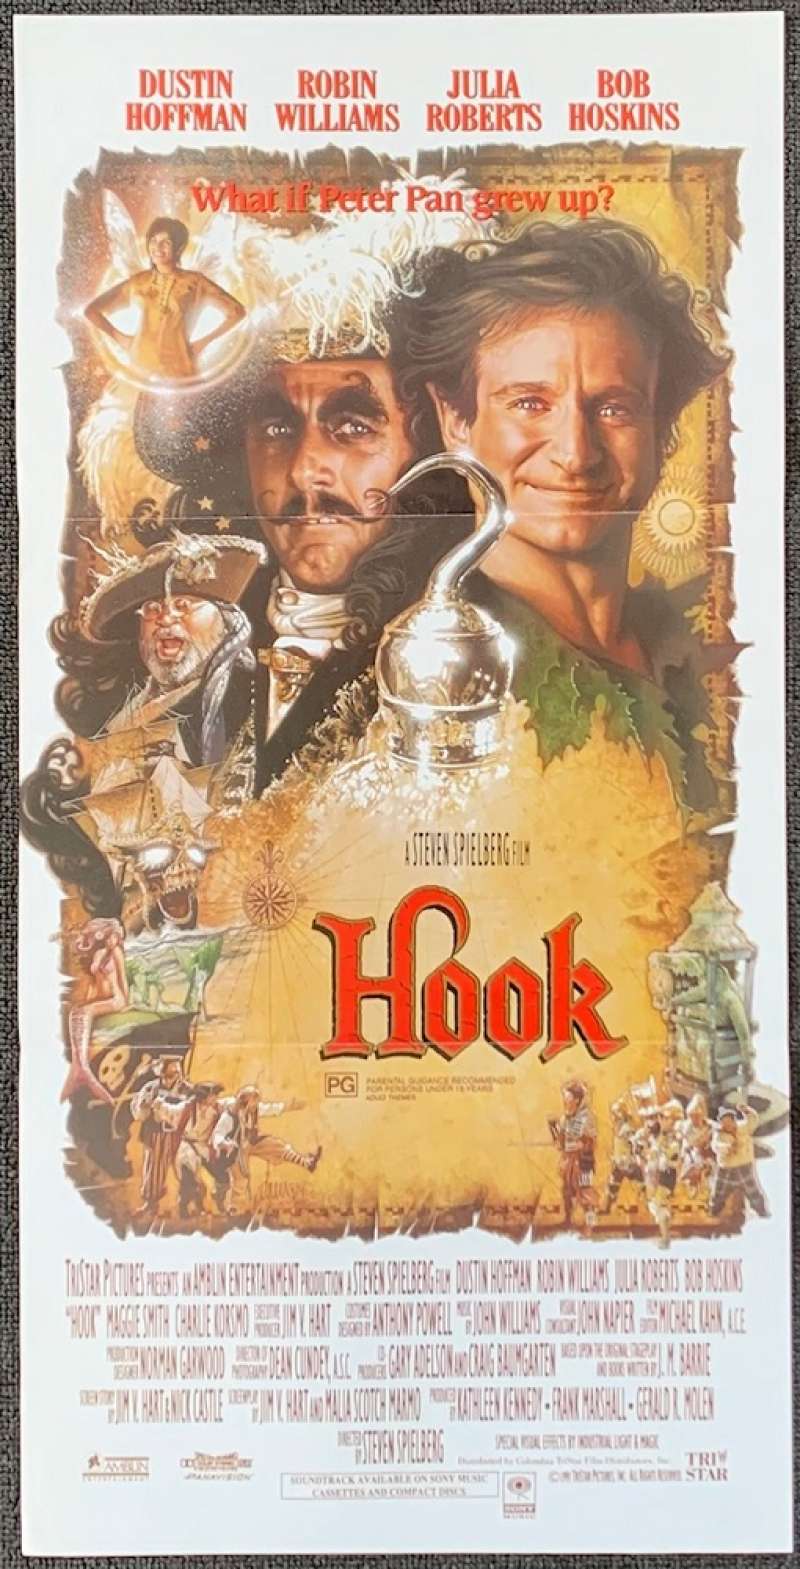 All About Movies - Hook Movie Poster Original Daybill 1991 Robin